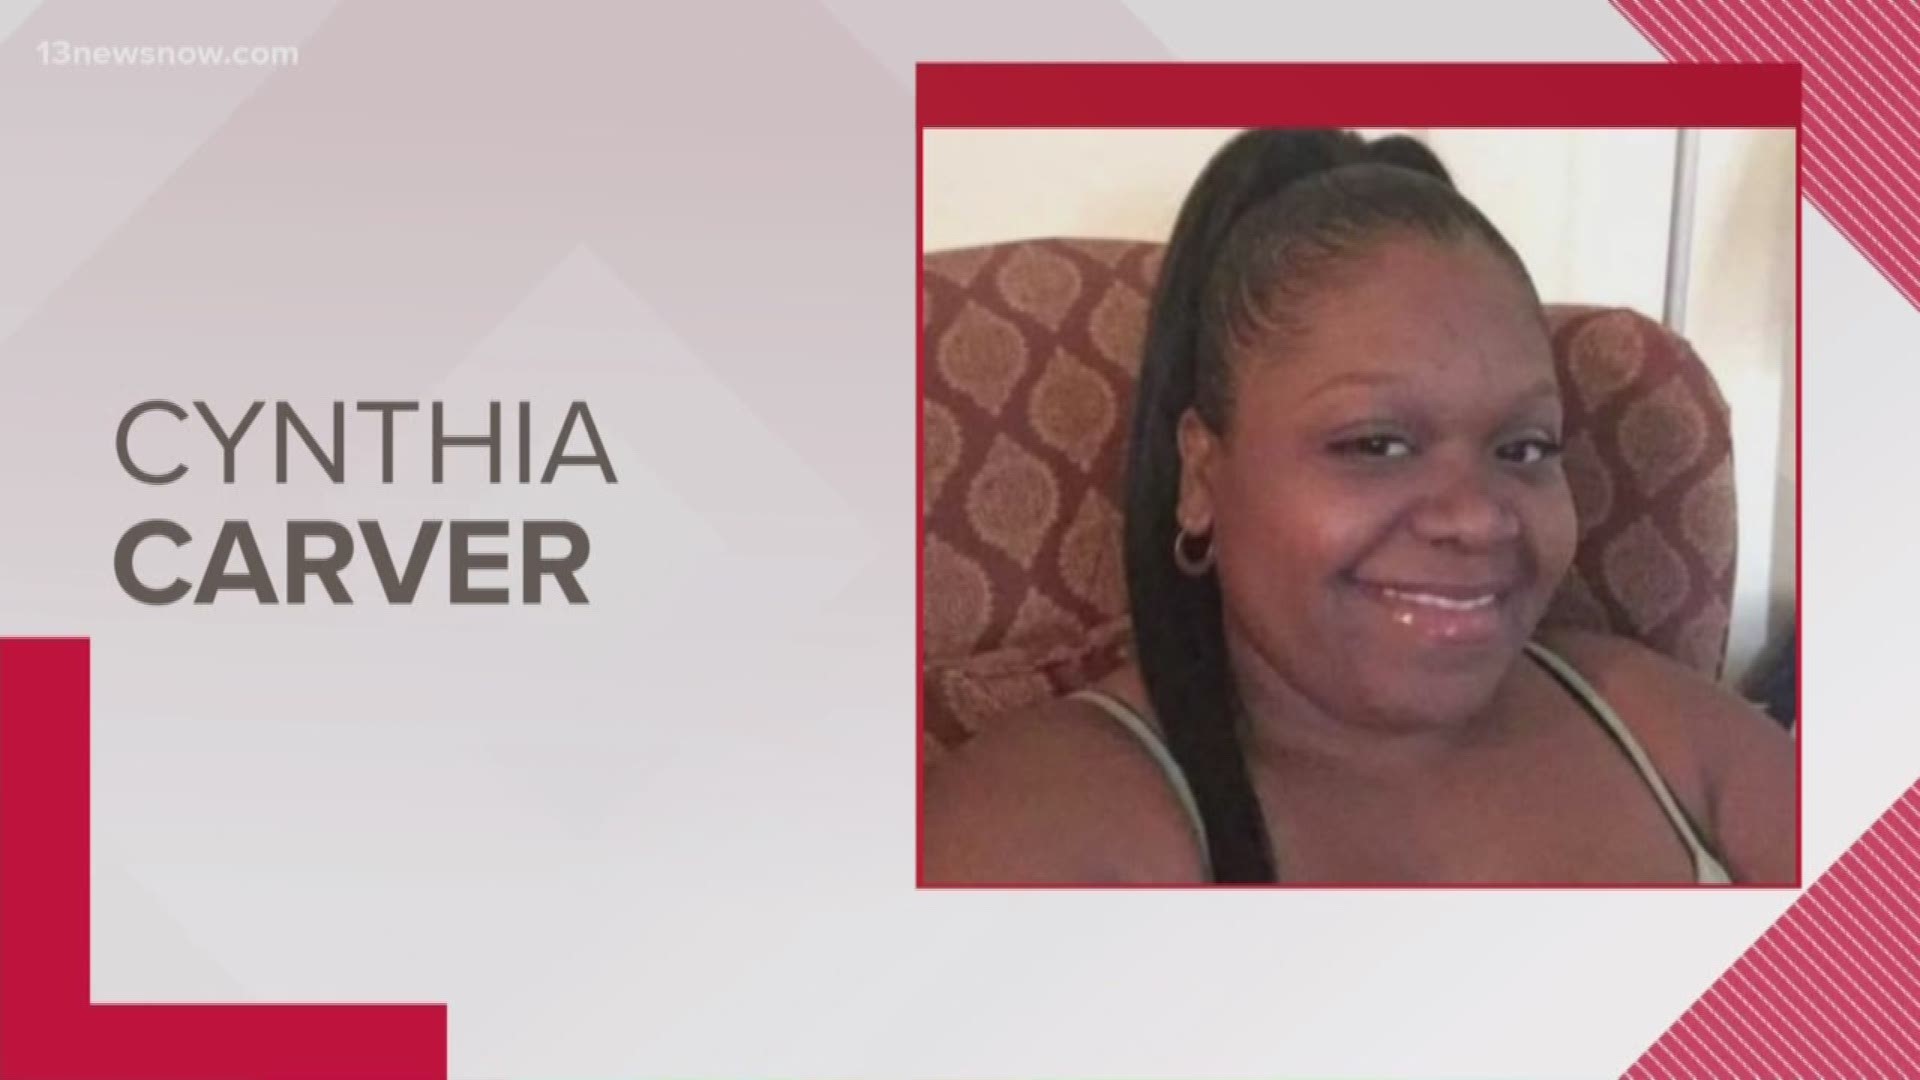 The body found in Suffolk Tuesday has been identified as the missing mother of two from Southampton, Cynthia Carver.